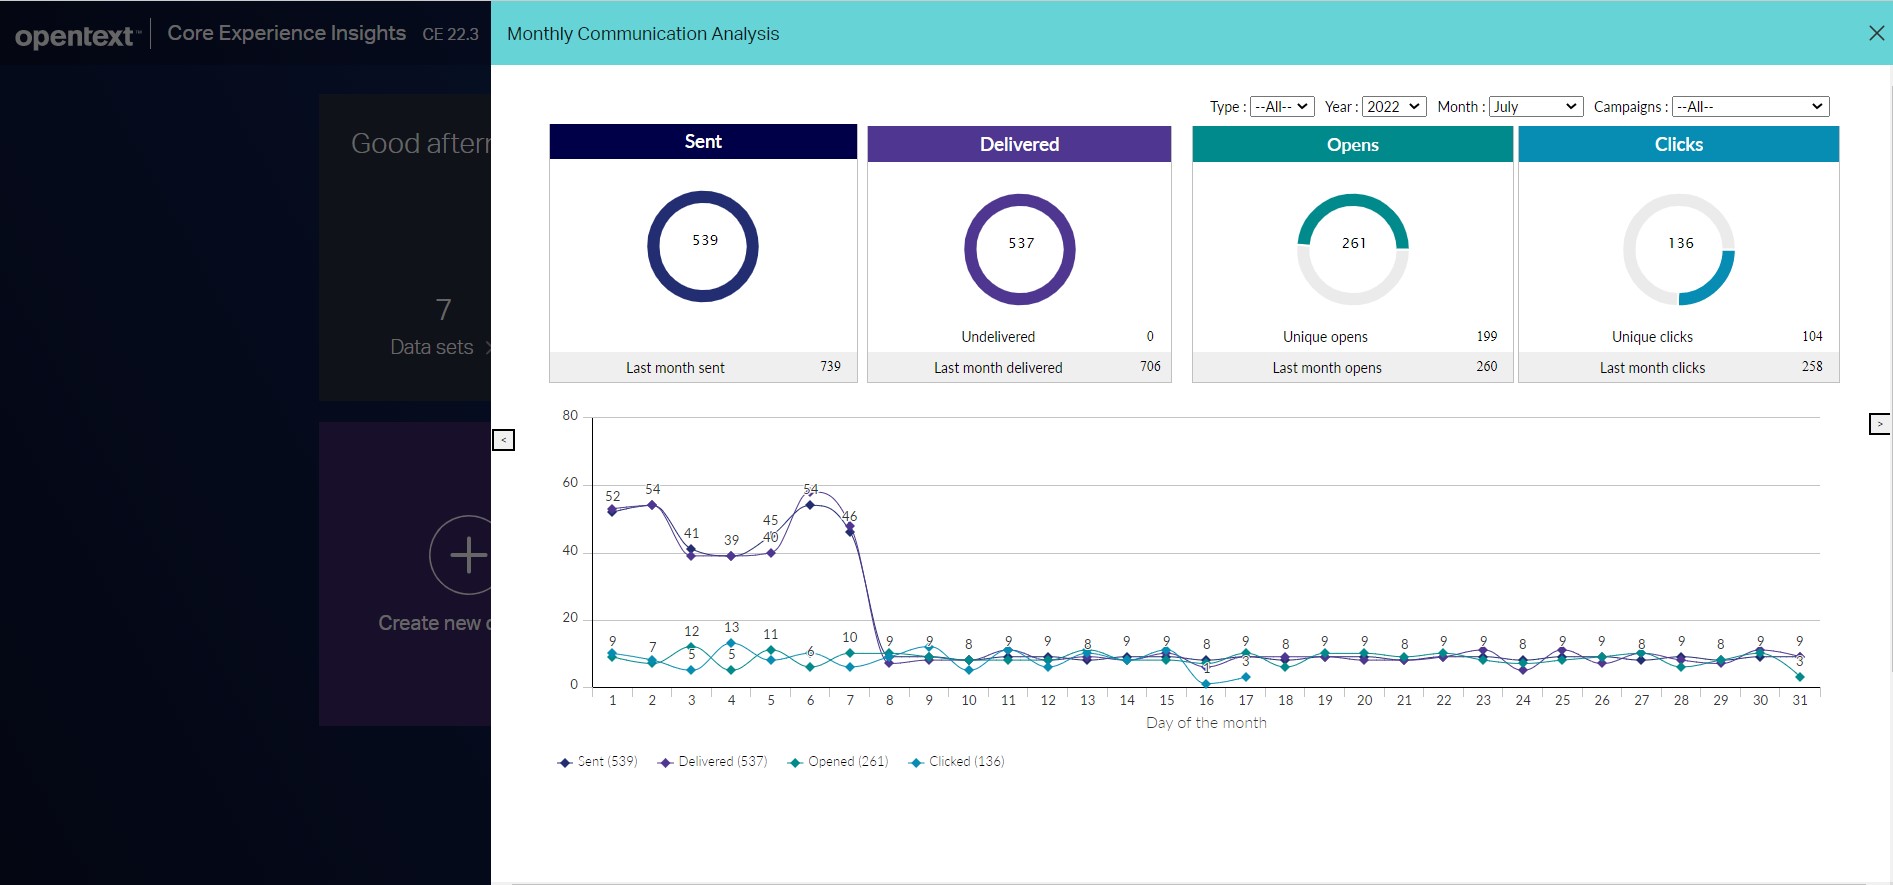 The screen shot shows a view of the new, easy-to-use report available in OpenText ore Experience Insights. 